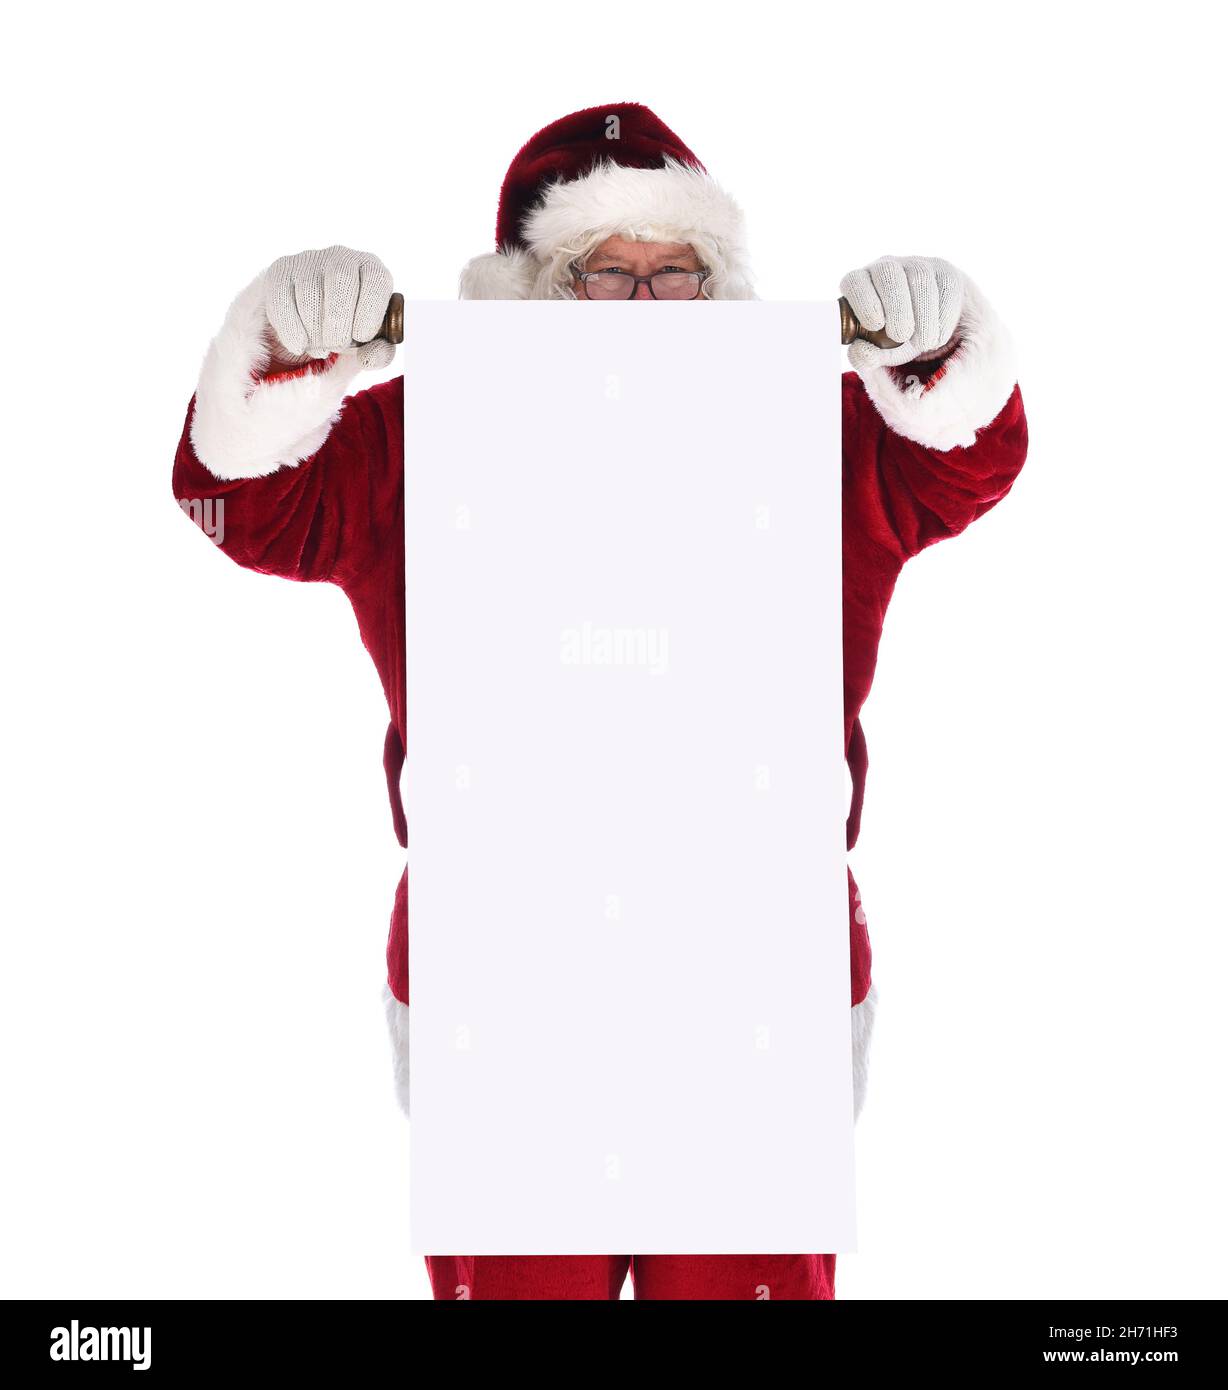 Santa Claus holding a blank scroll in front of his body. Santa is looking over the top of the long roll of paper. Stock Photo